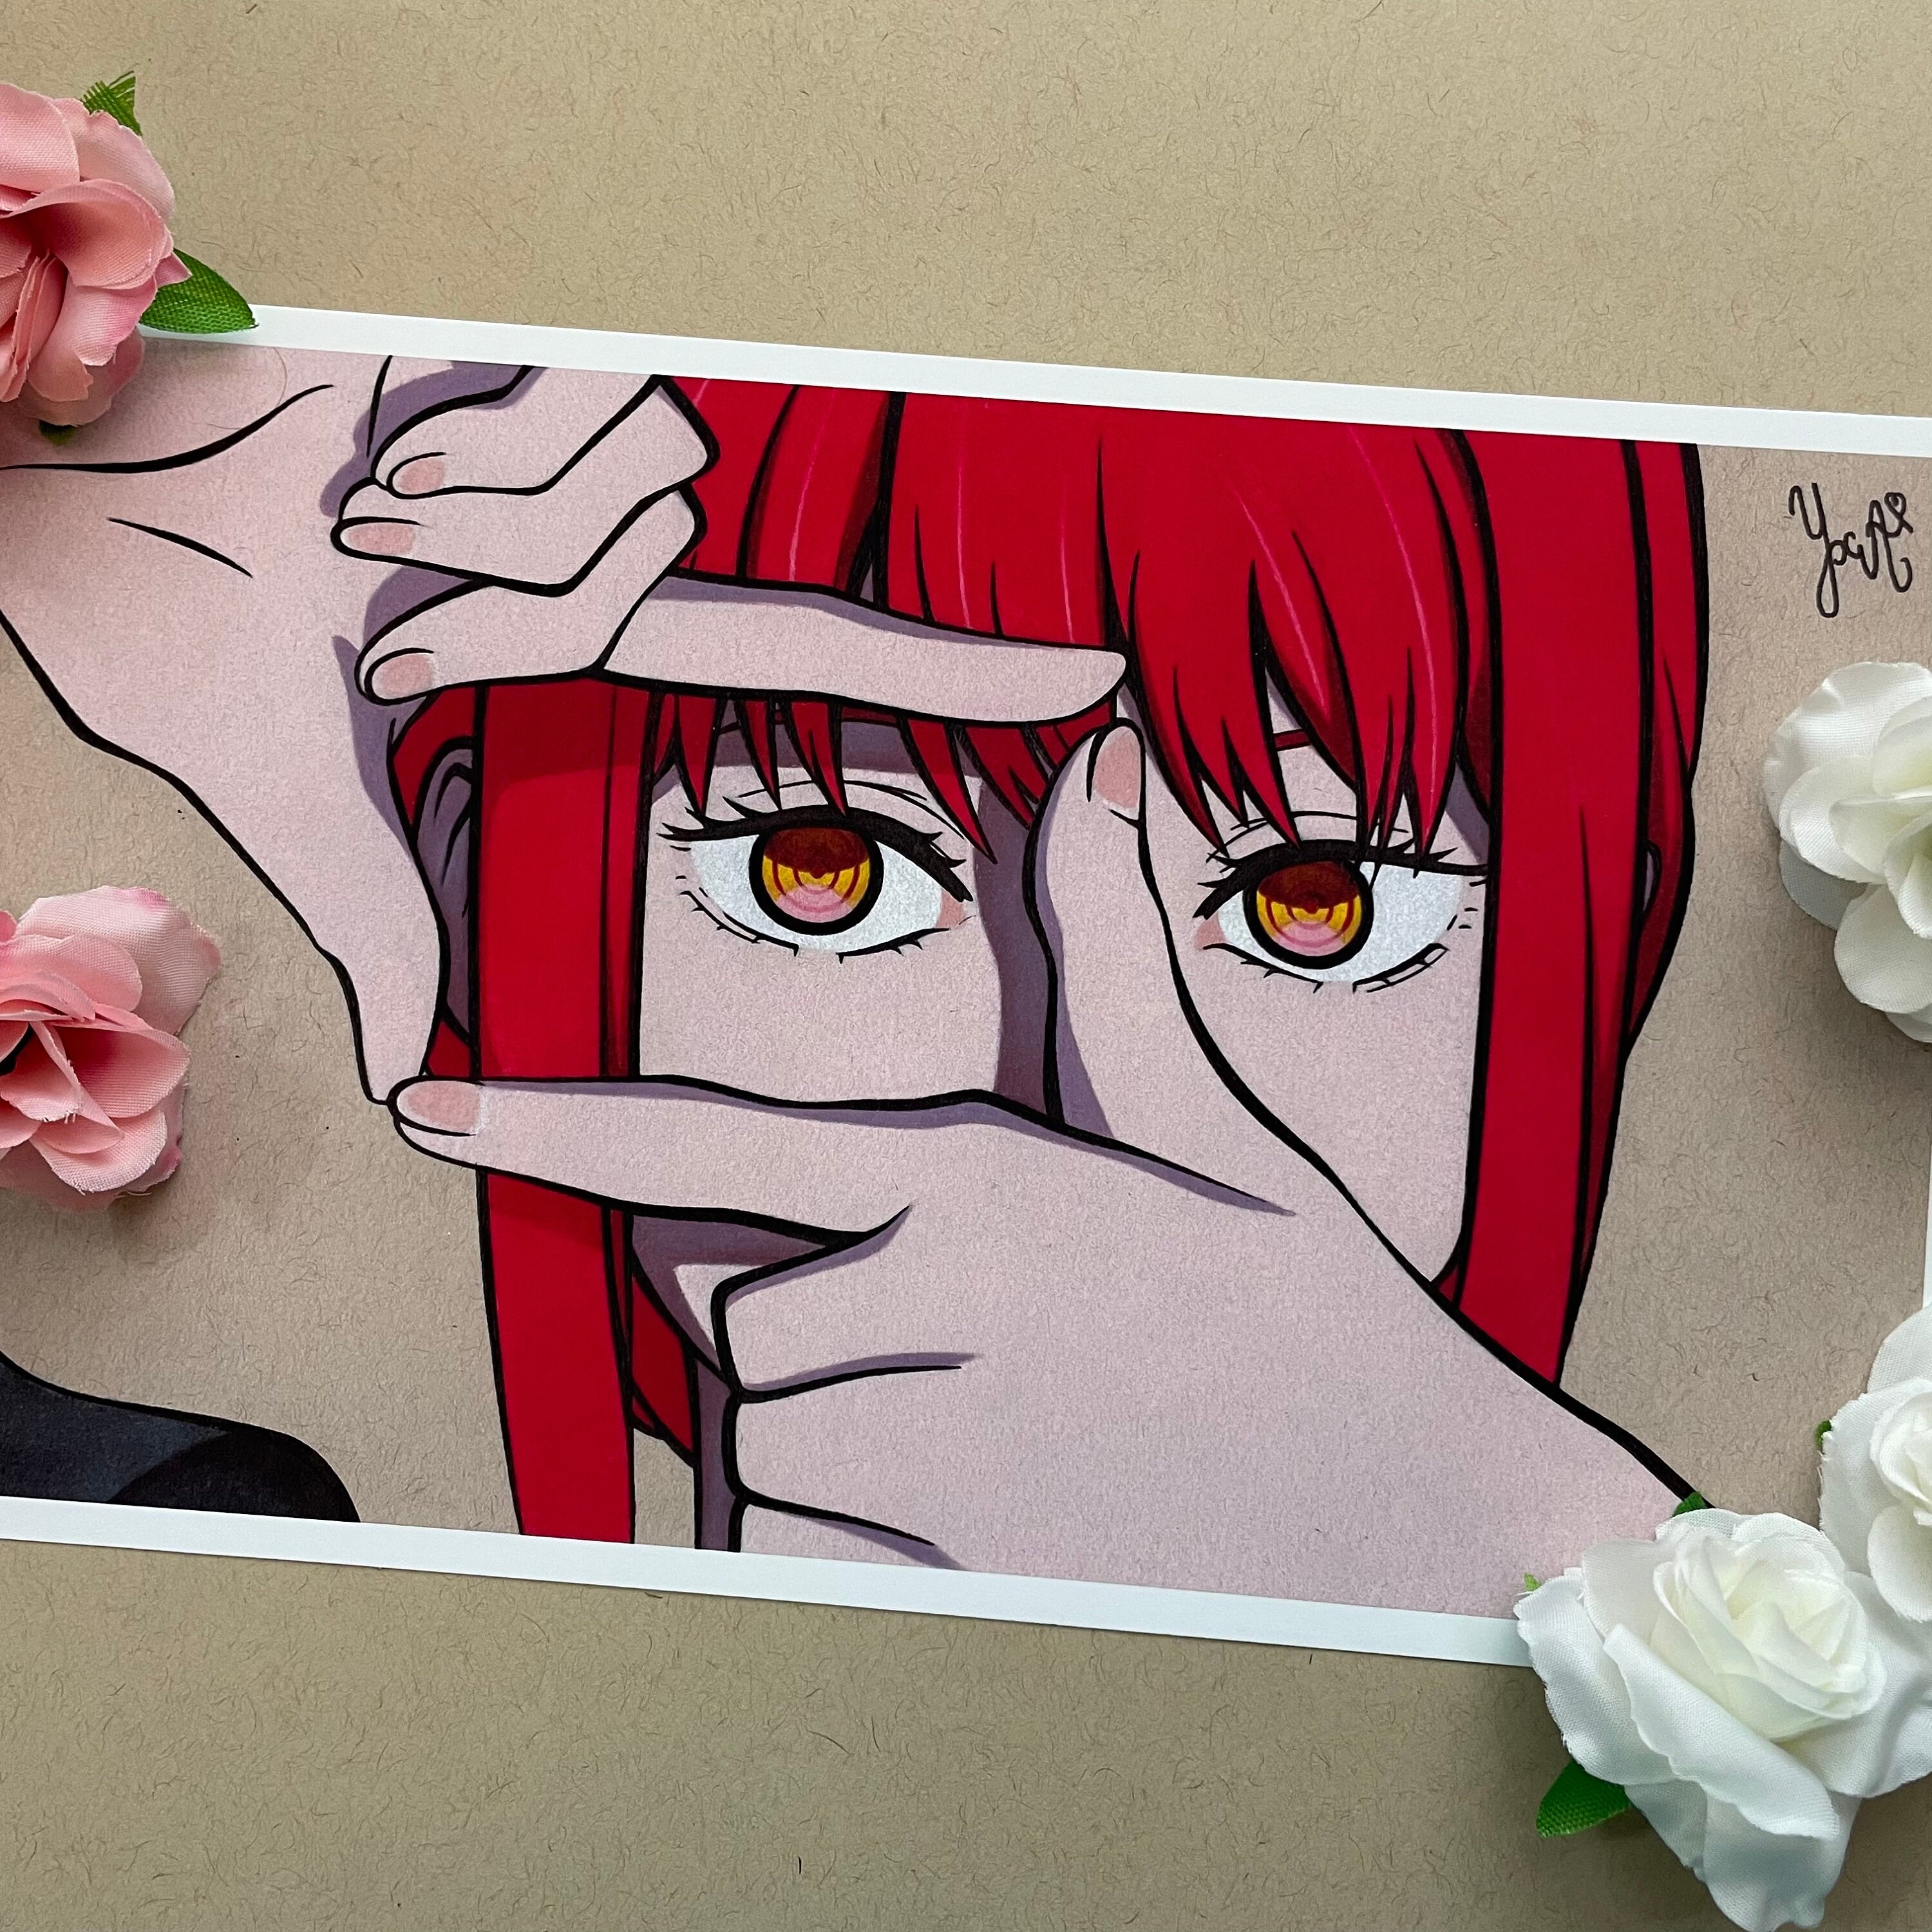 Elfen Lied Anime Song Manga PNG, Clipart, Anime, Arm, Art, Be Your Girl,  Cartoon Free PNG